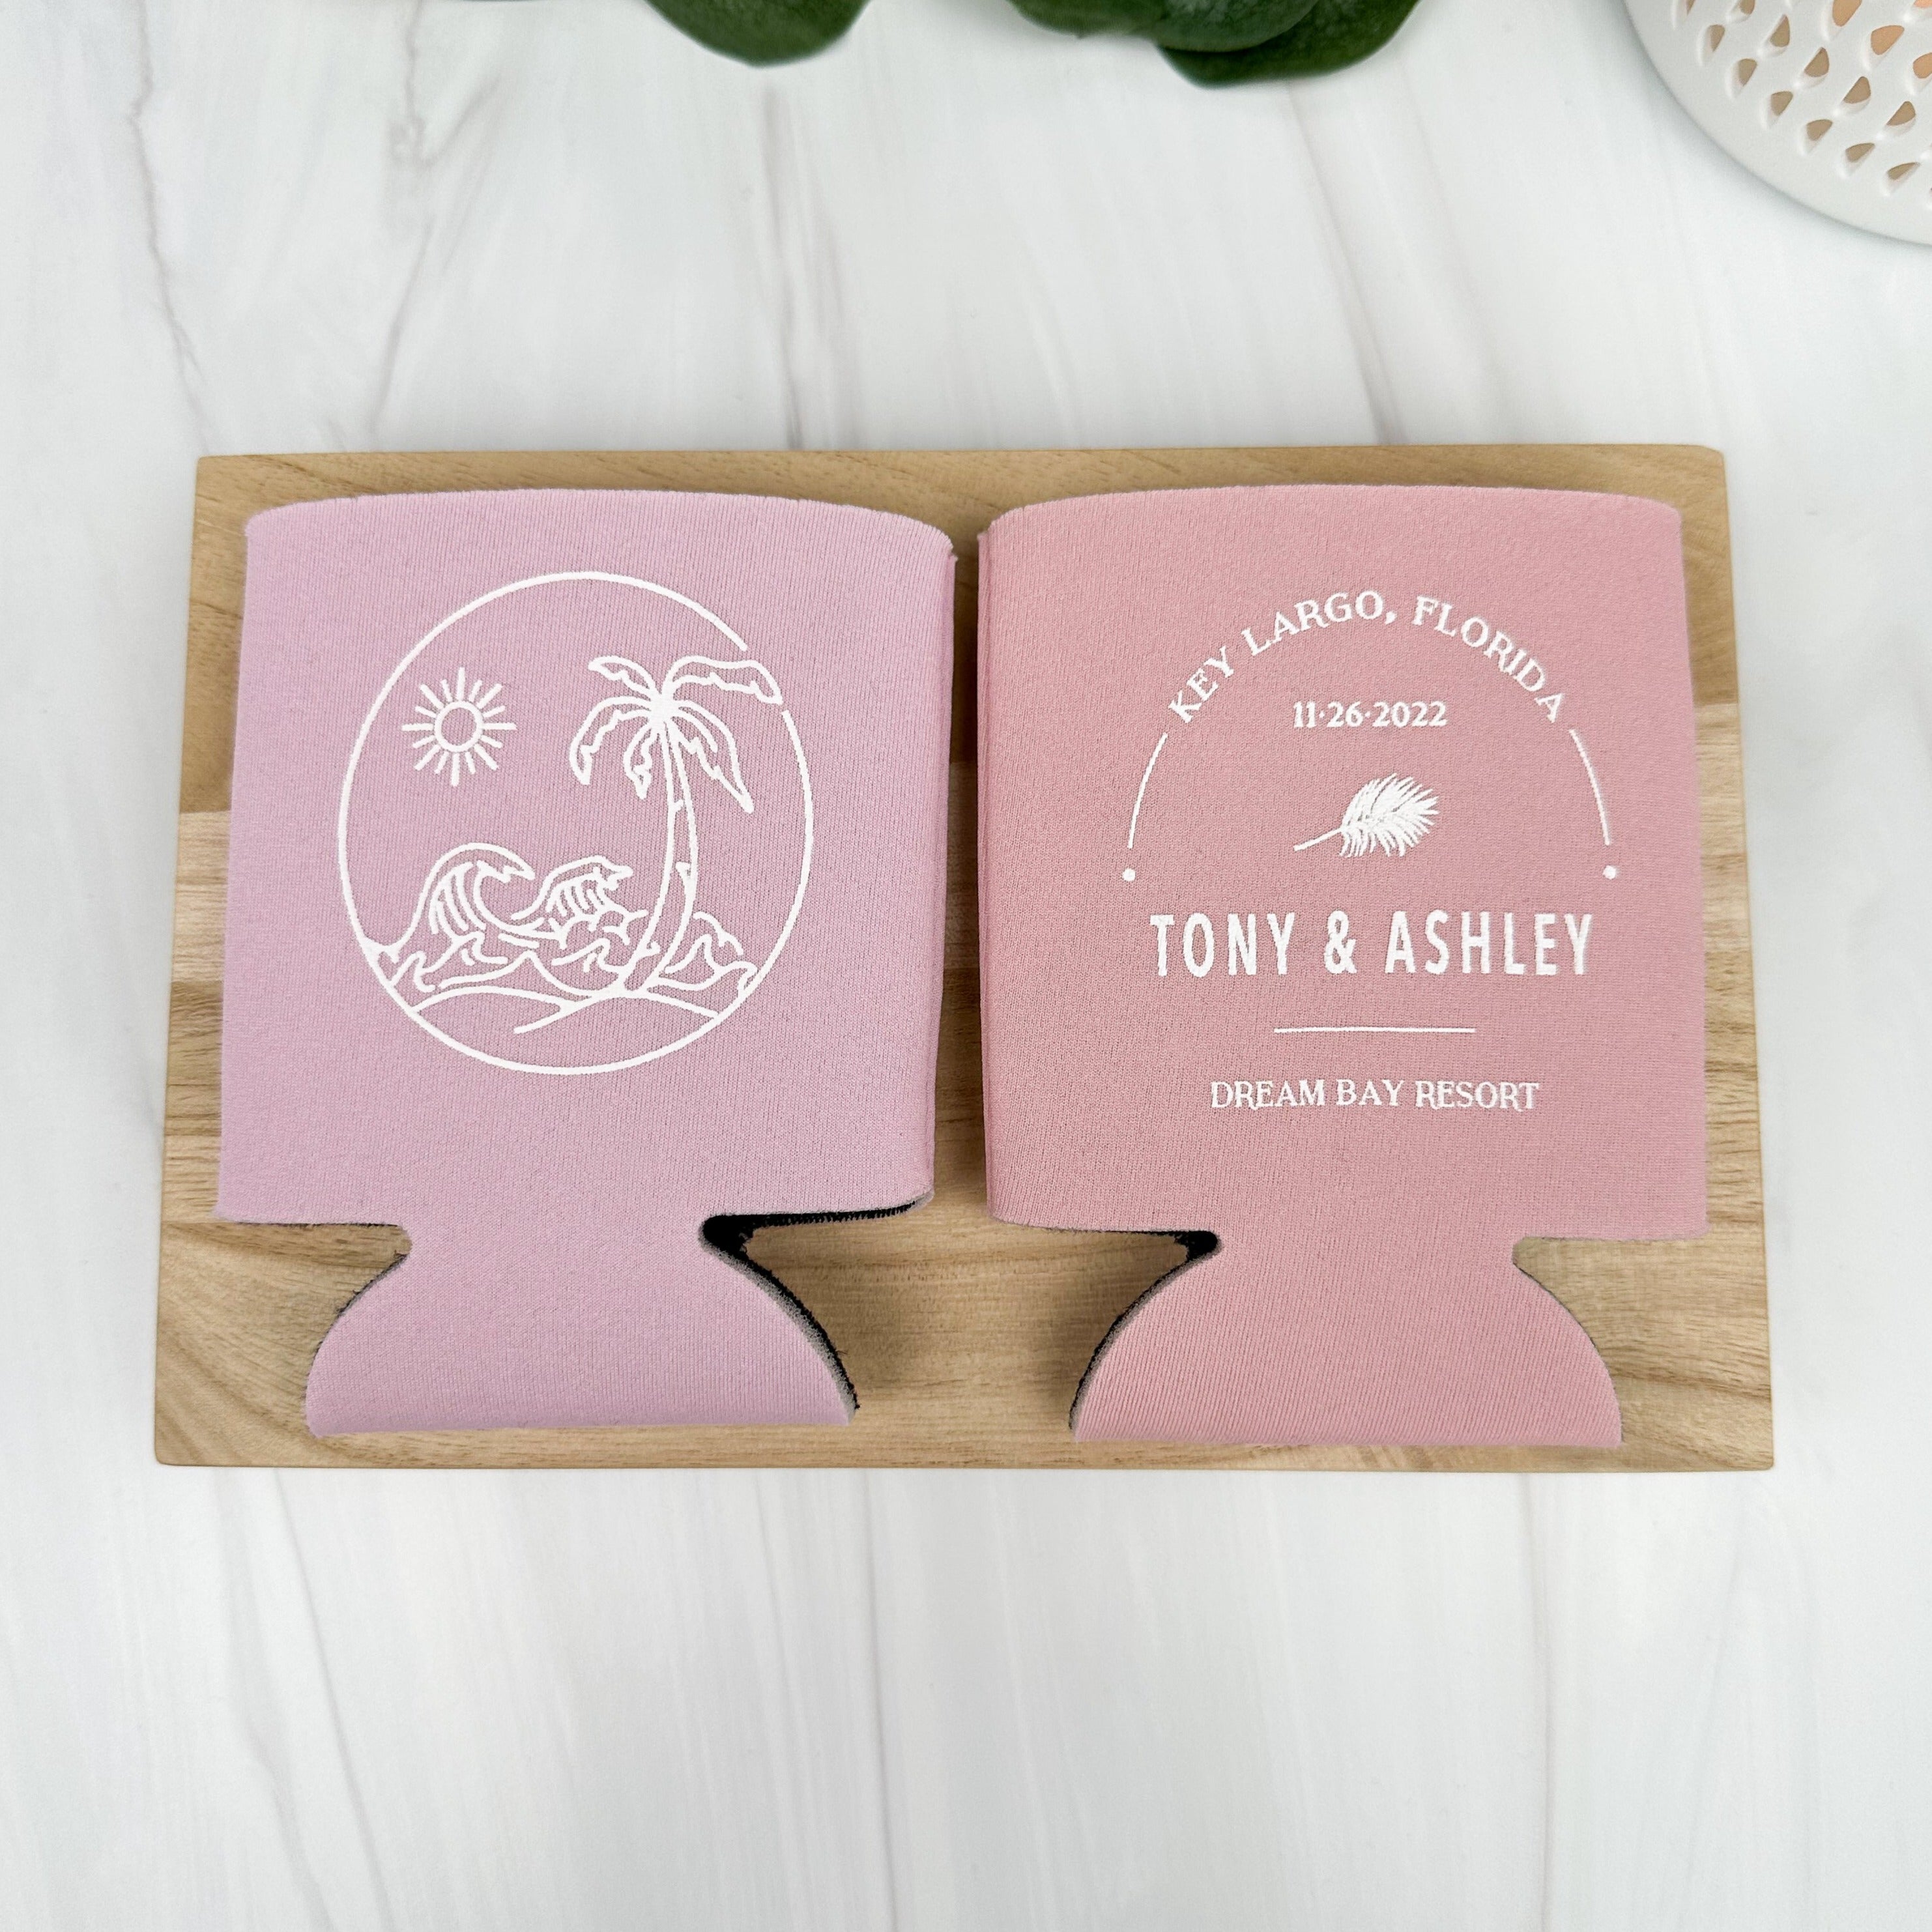 Tropical destination wedding can coolers in colors blush and dusty rose